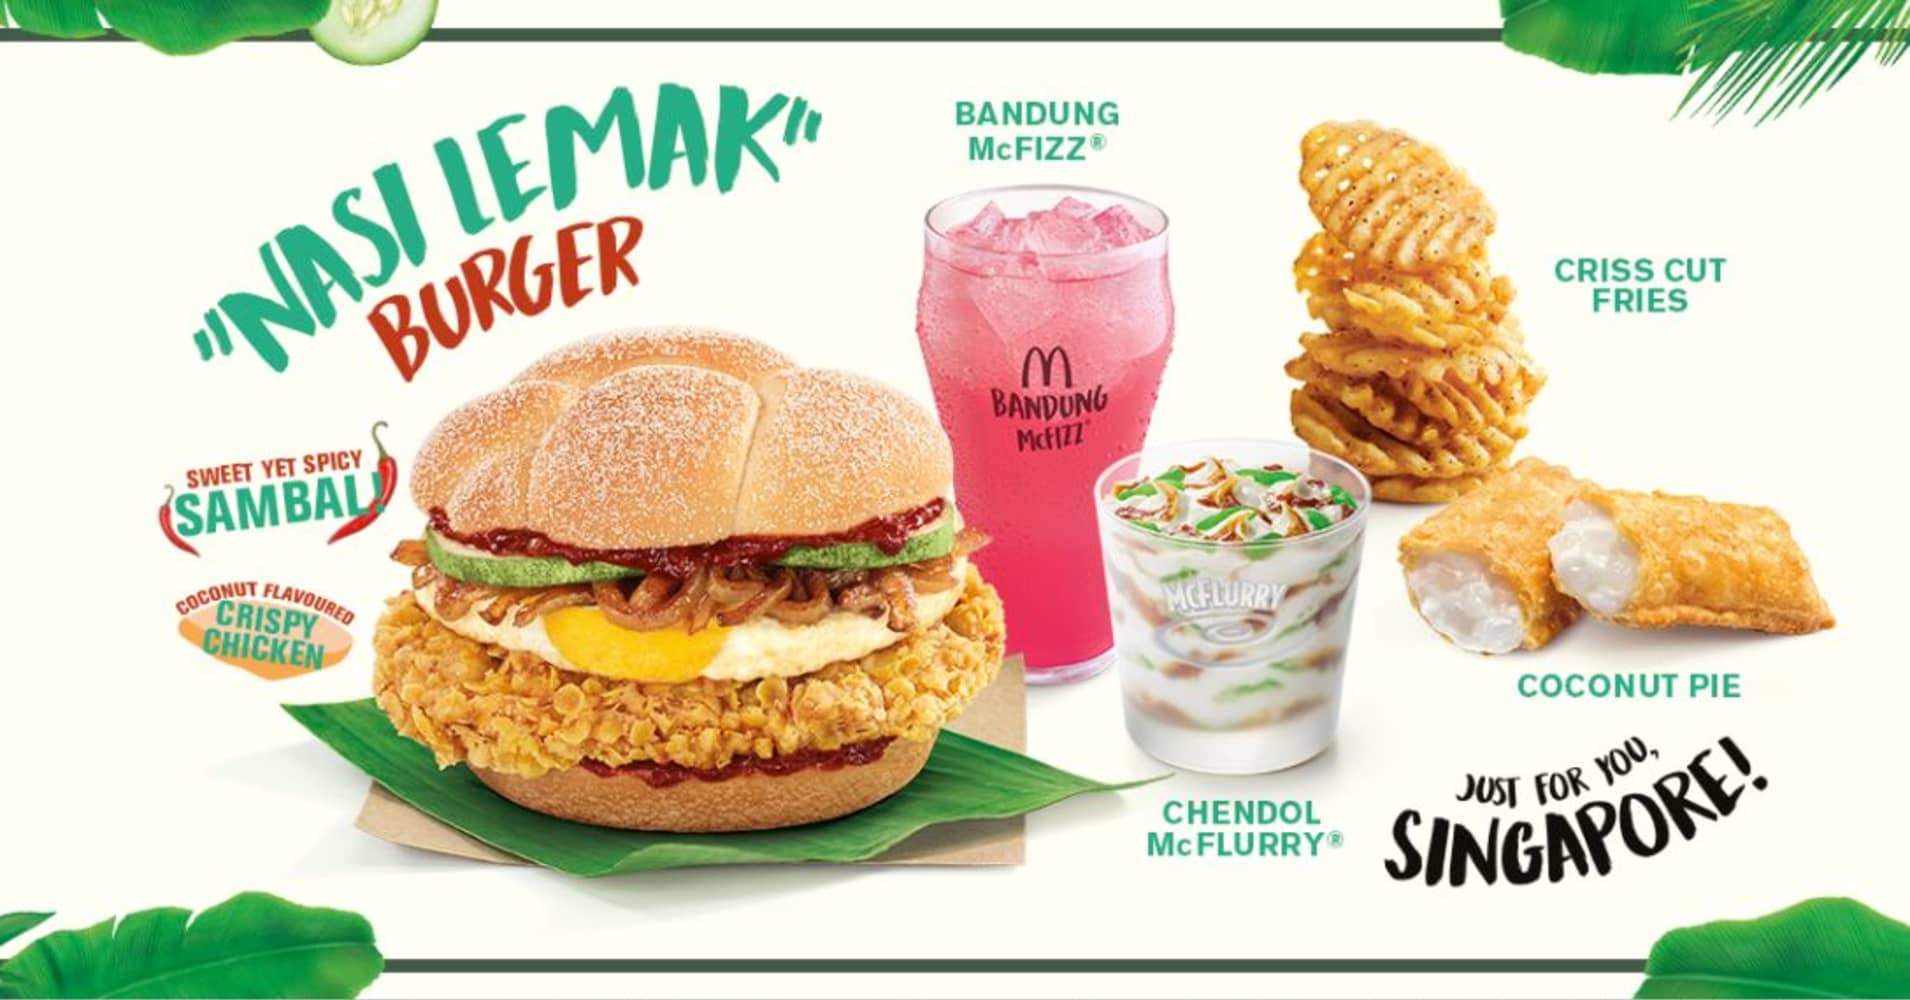 Nasi Lemak Burger Mcd : McDonald's latest regional burger is selling like crazy ... - First of all, i think that the mcd nasi lemak burger packaging is pretty cool.